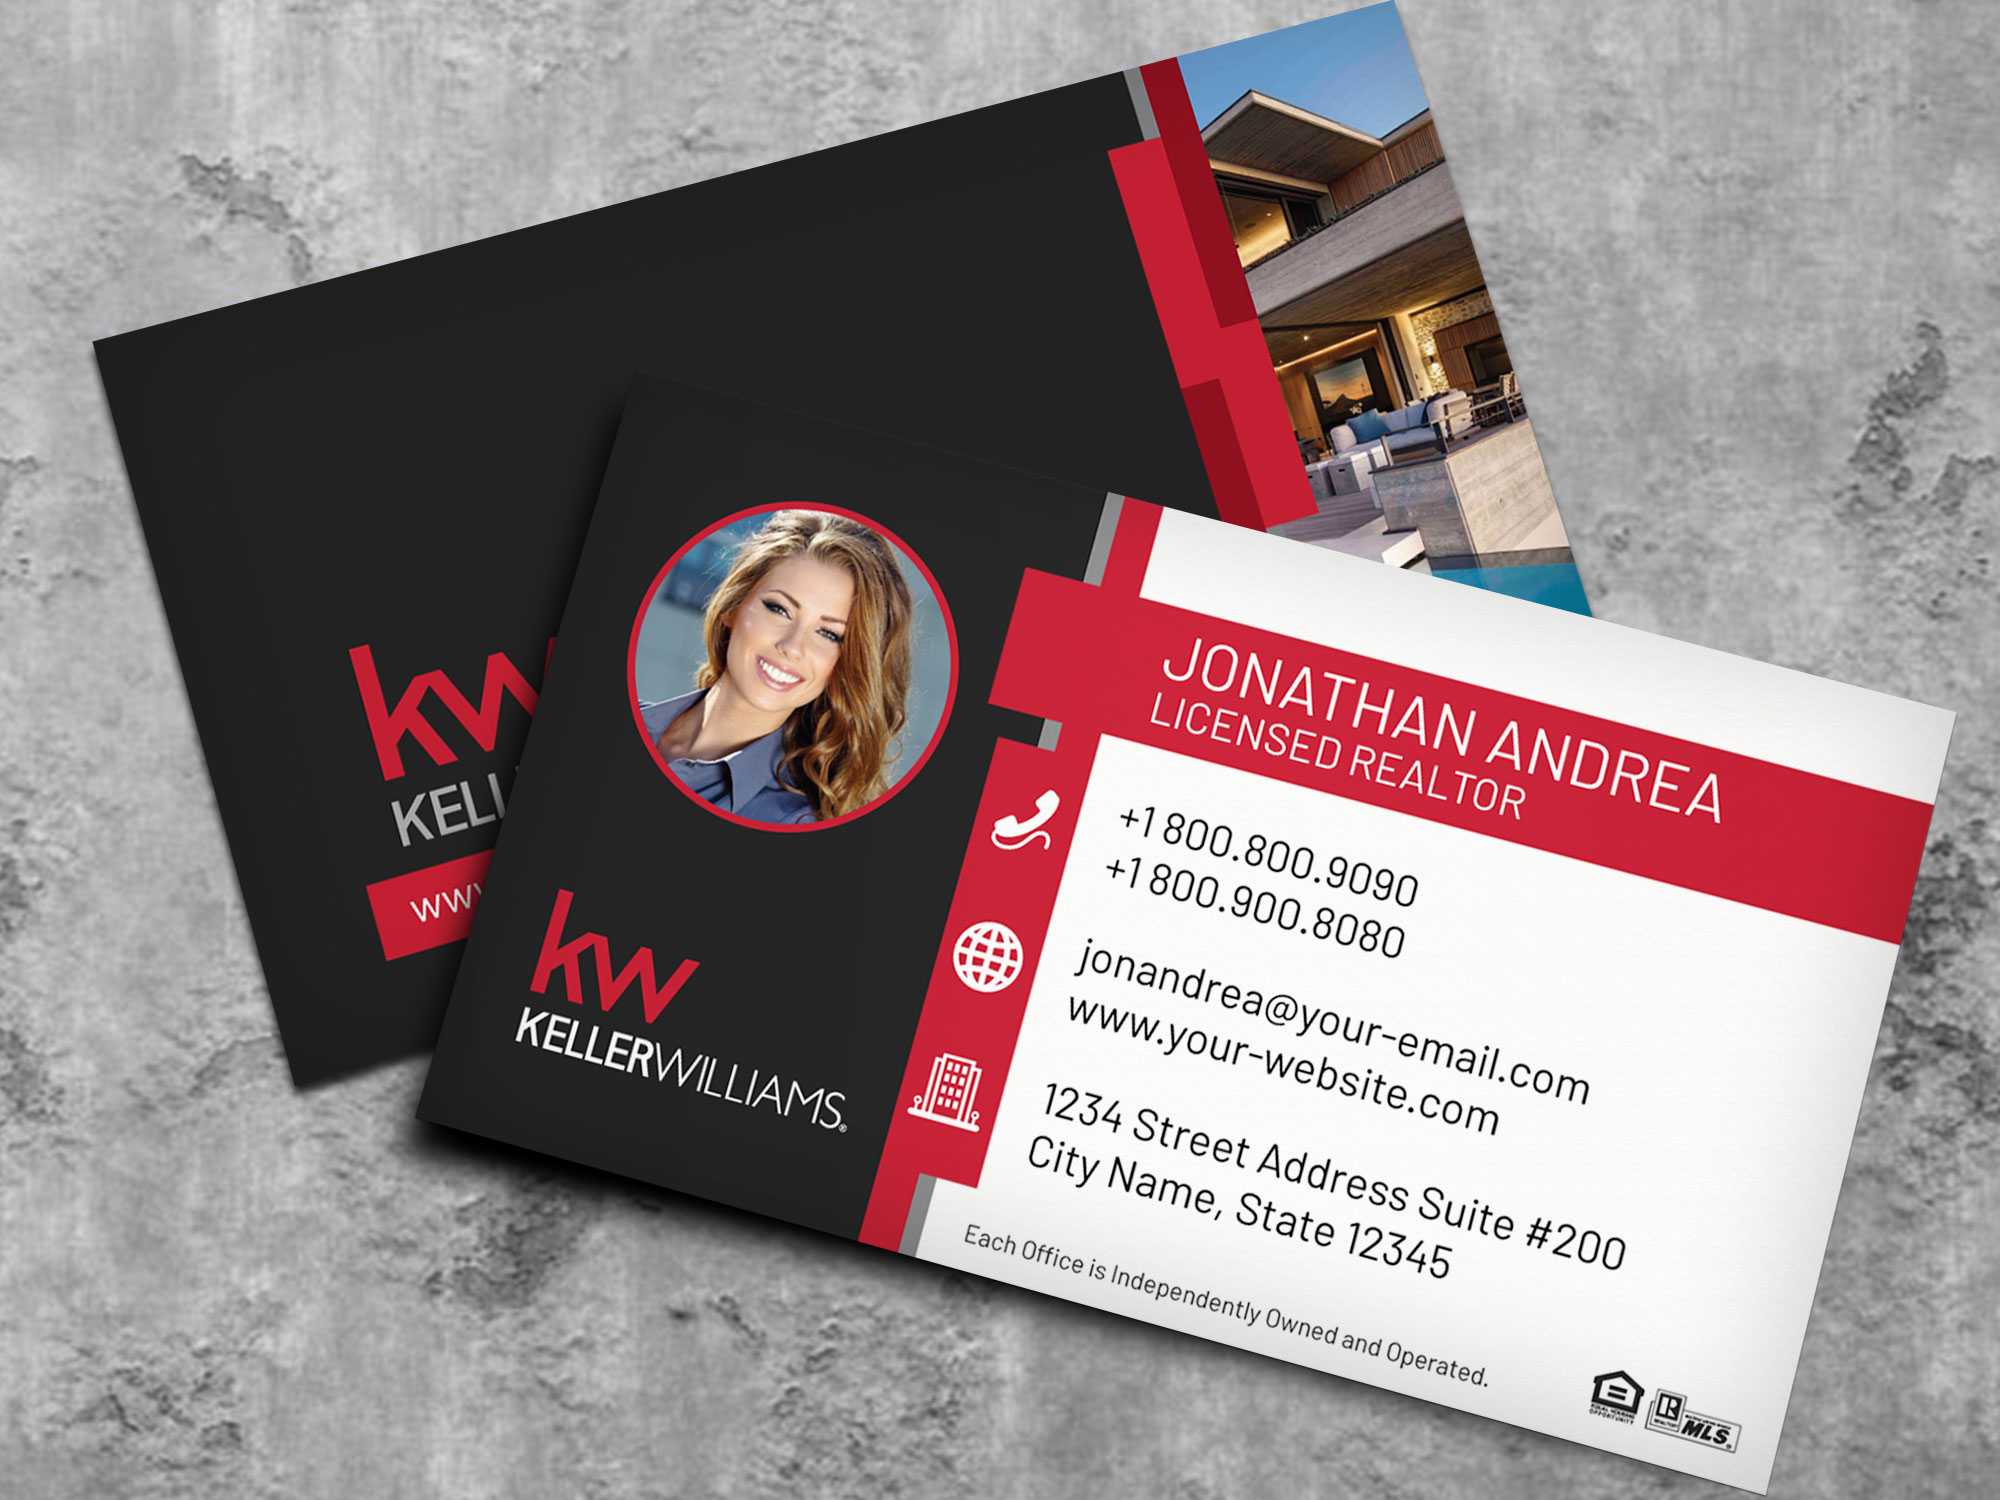 Keller Williams Business Card Template Bc19702Kw For Keller Williams Business Card Templates